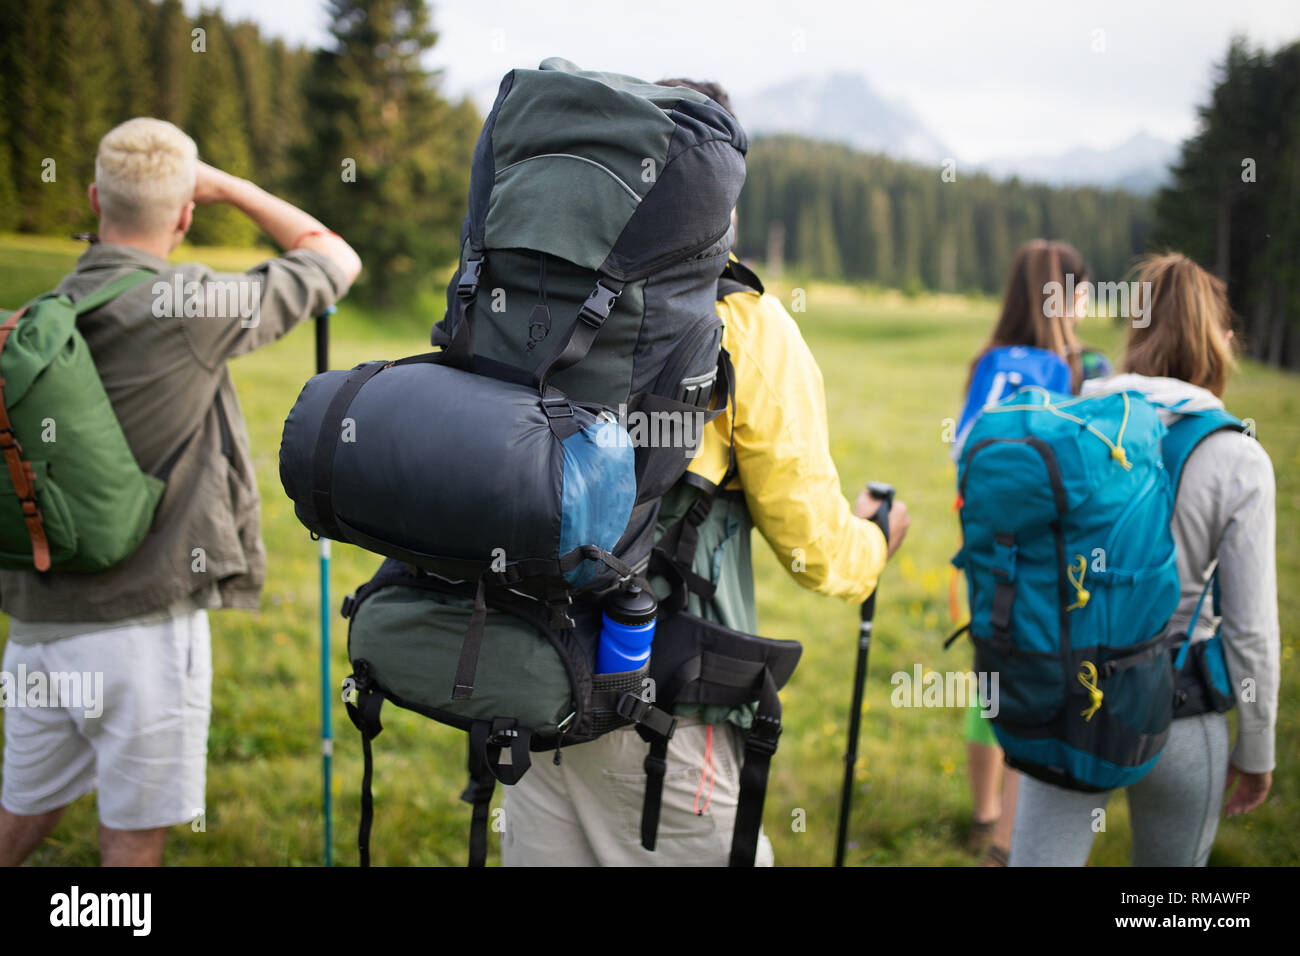 Group of hikers with backpacks and sticks walking on mountain. Friends making an excursion Stock Photo